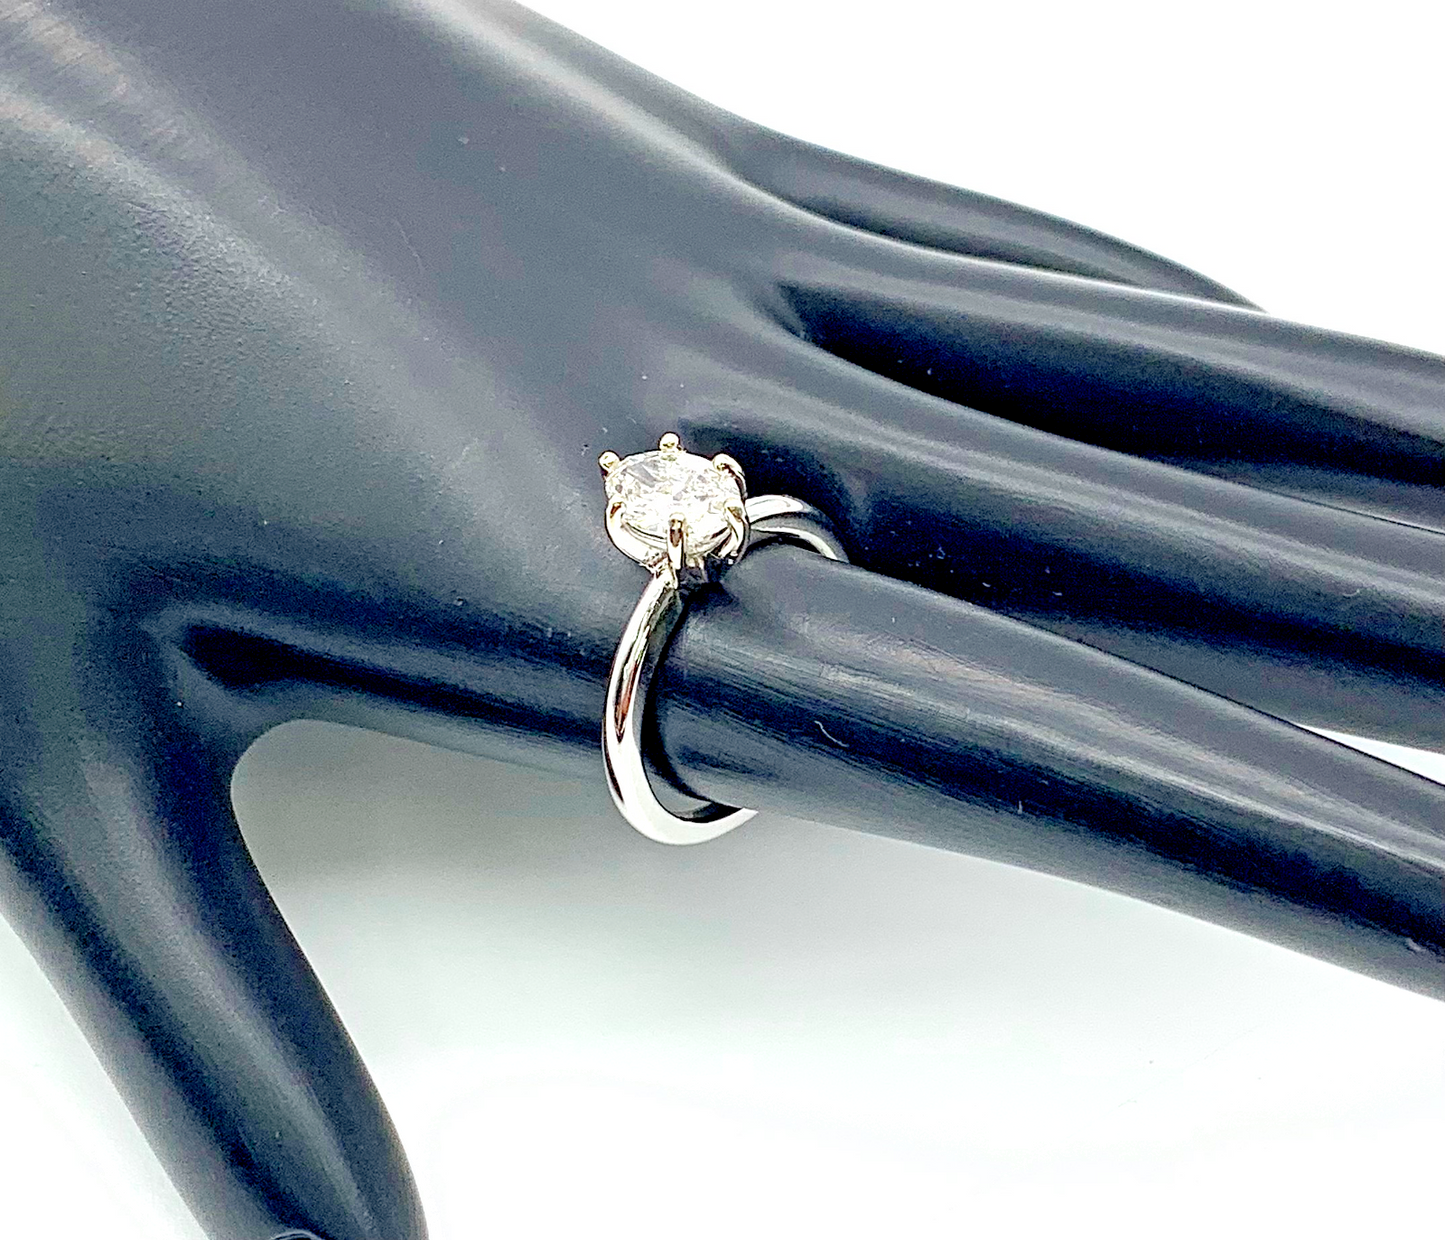 Lab Grown Solitaire Diamond Engagement Ring 1CT, F/VS1 14K White Gold, Size 7